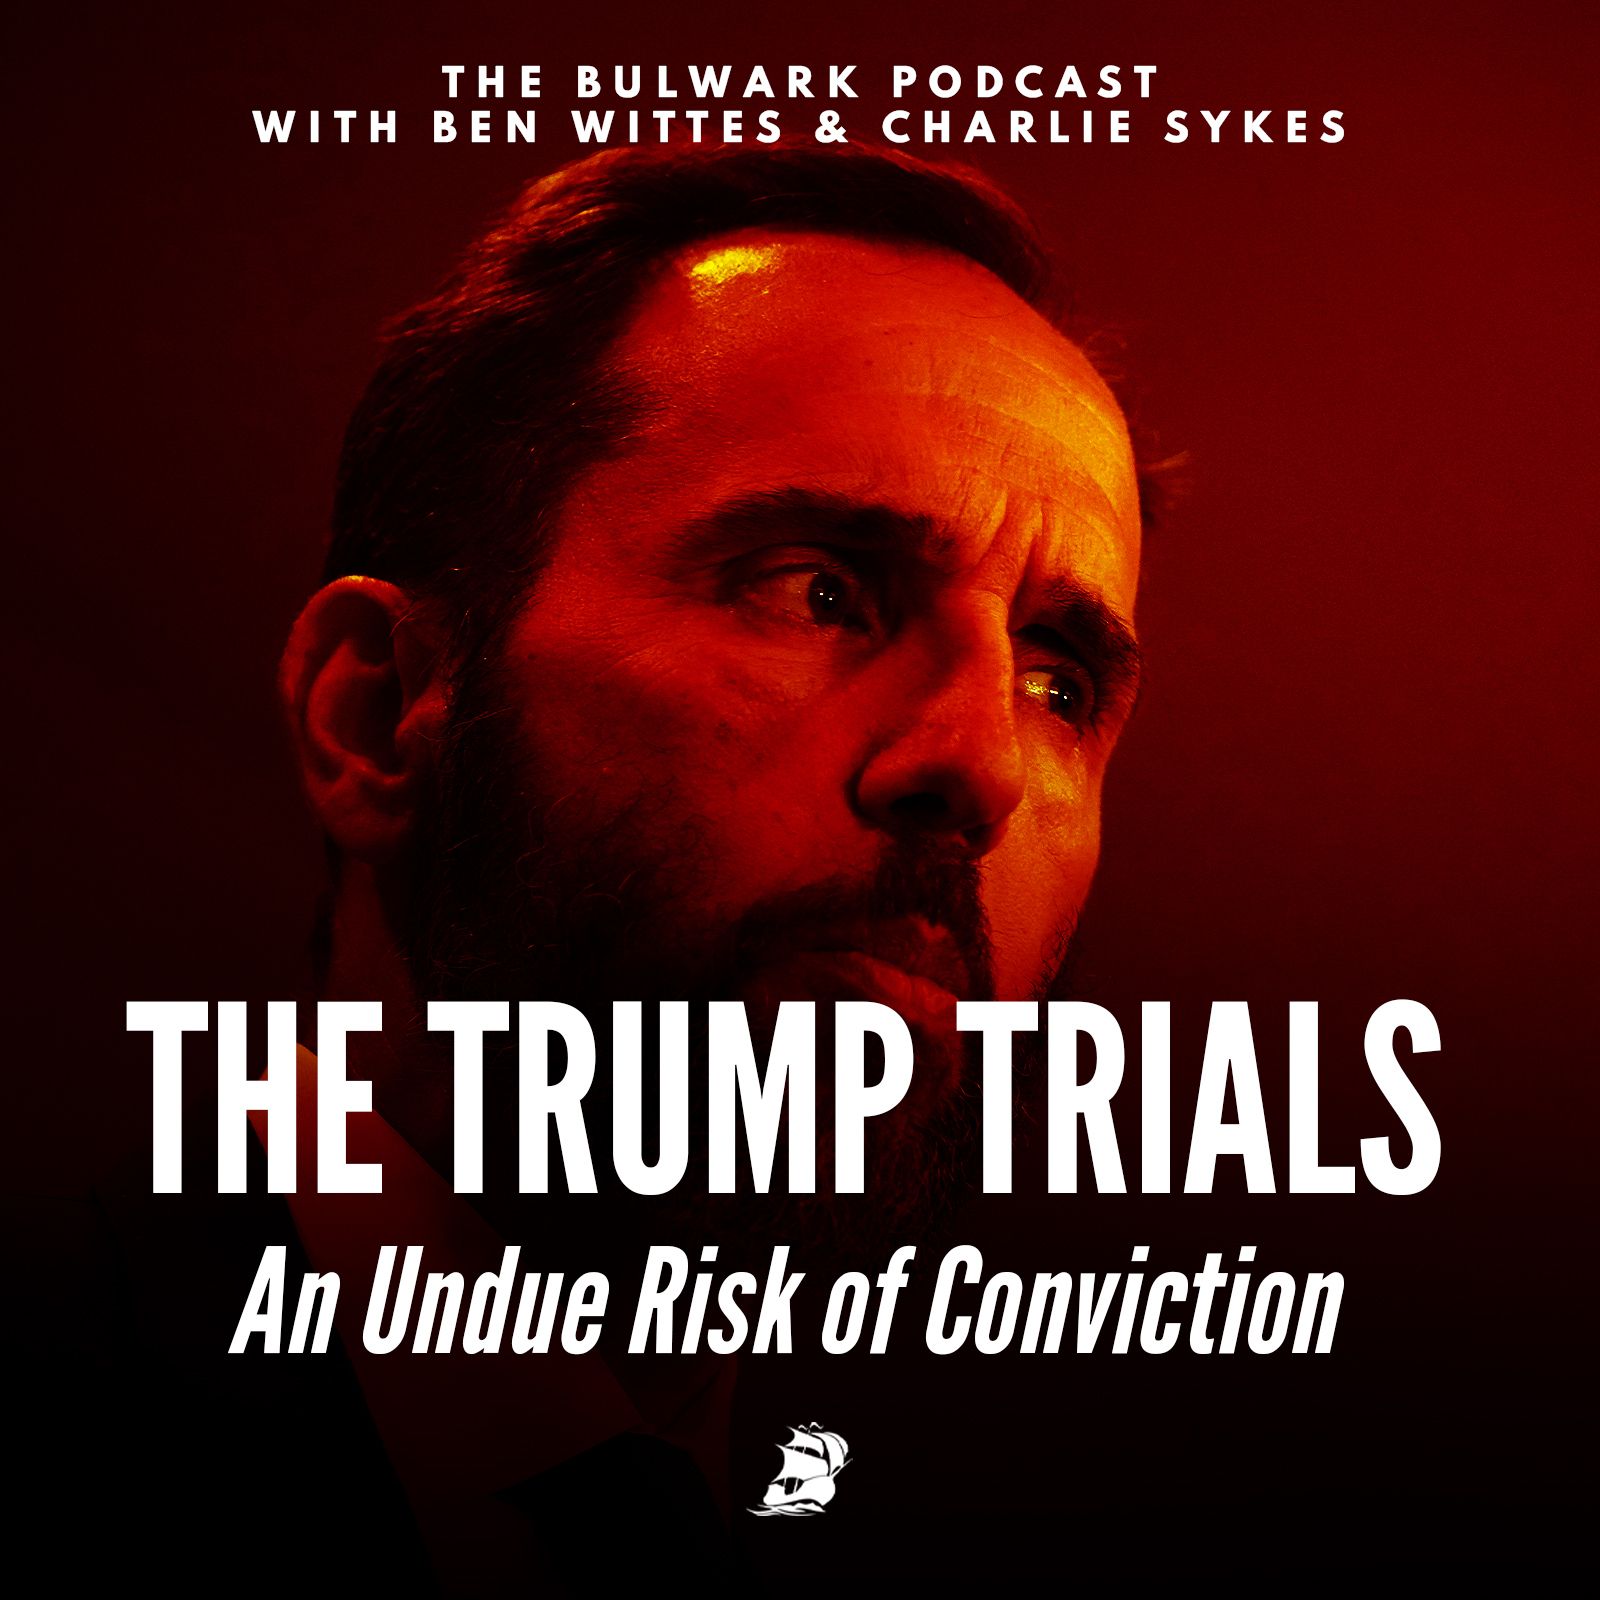 An Undue Risk of Conviction by The Bulwark Podcast